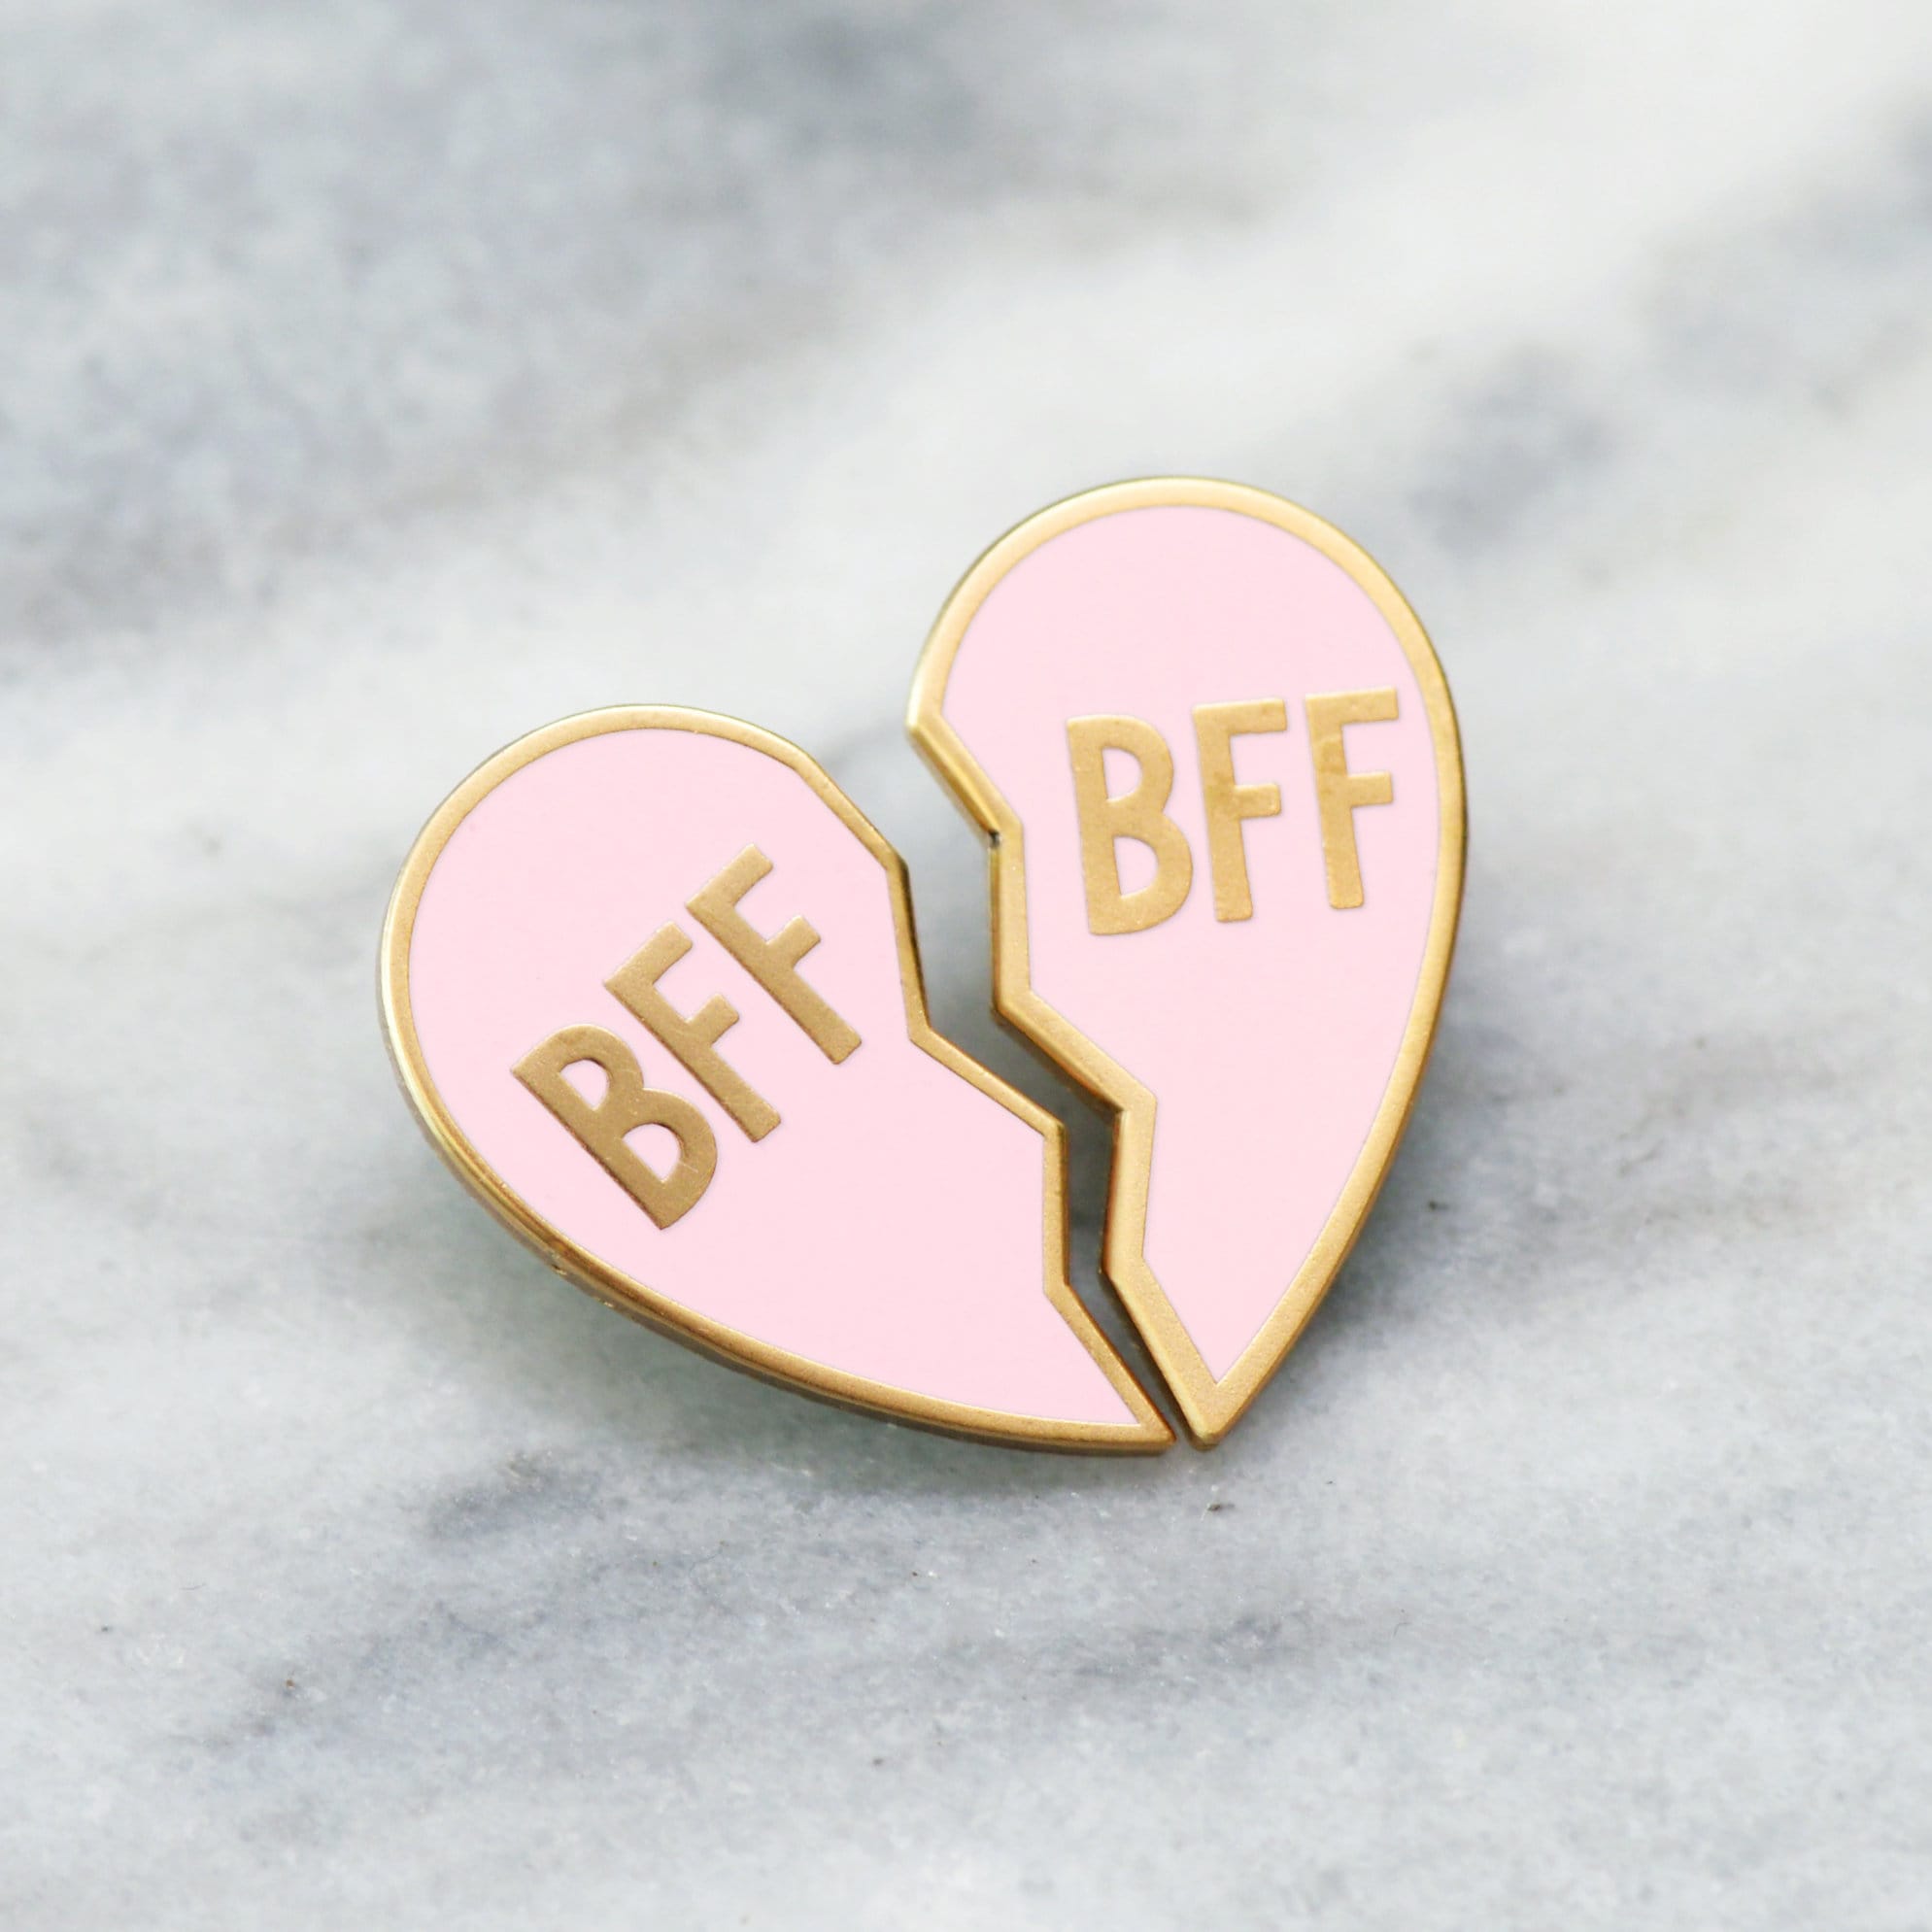 BBF Friendship Jewelry: Enamel Heart Charm Brooch Pins For Womens Fashion  Dinosaur Necklace From Donet, $1.75